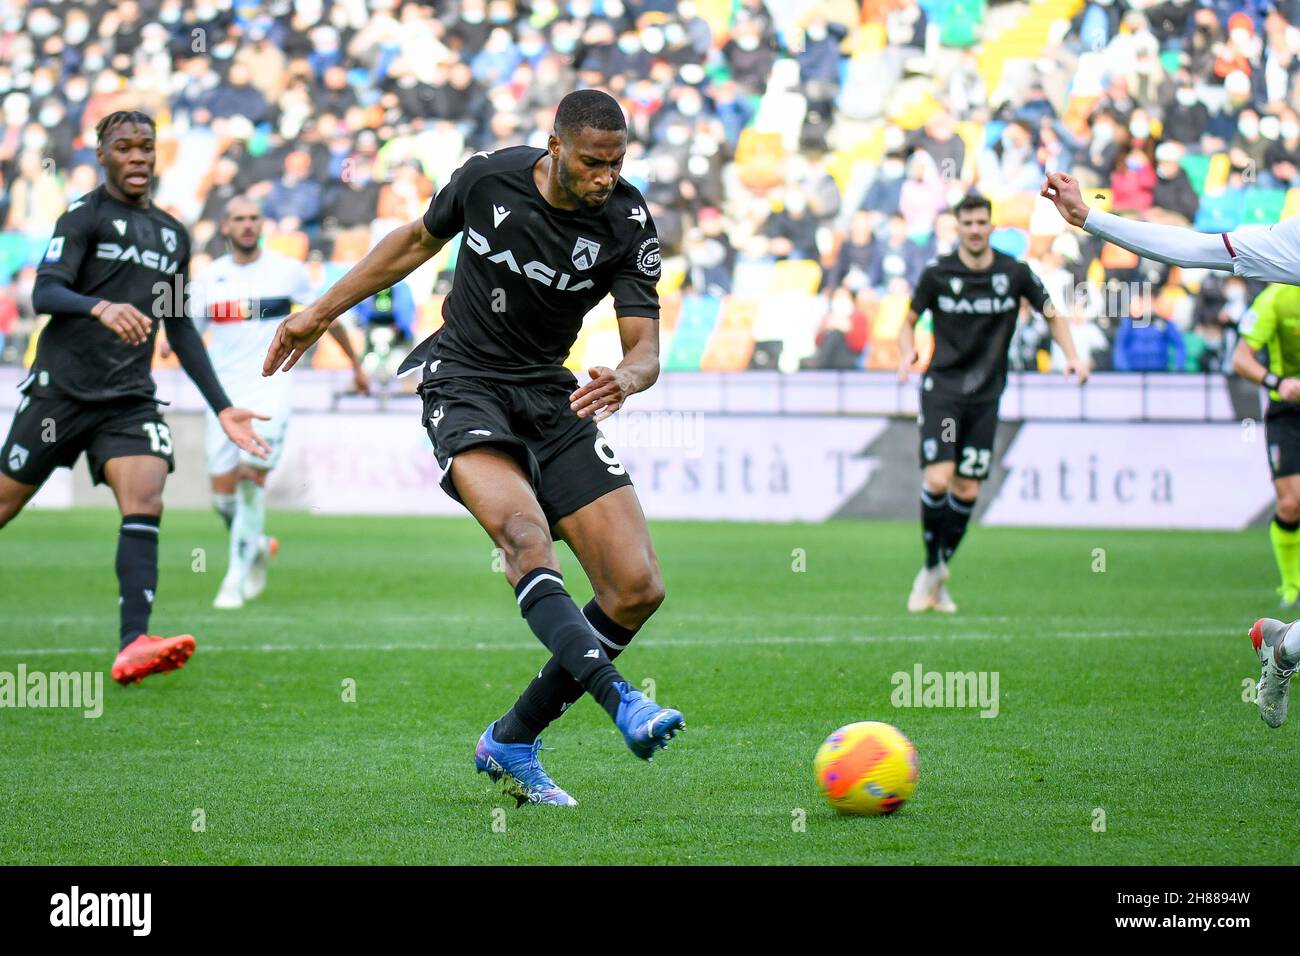 Udine, Italy. 28th Nov, 2021. Norberto Bercique Gomes Betuncal (Udinese) tries to score a goal during Udinese Calcio vs Genoa CFC, italian soccer Serie A match in Udine, Italy, November 28 2021 Credit: Independent Photo Agency/Alamy Live News Stock Photo